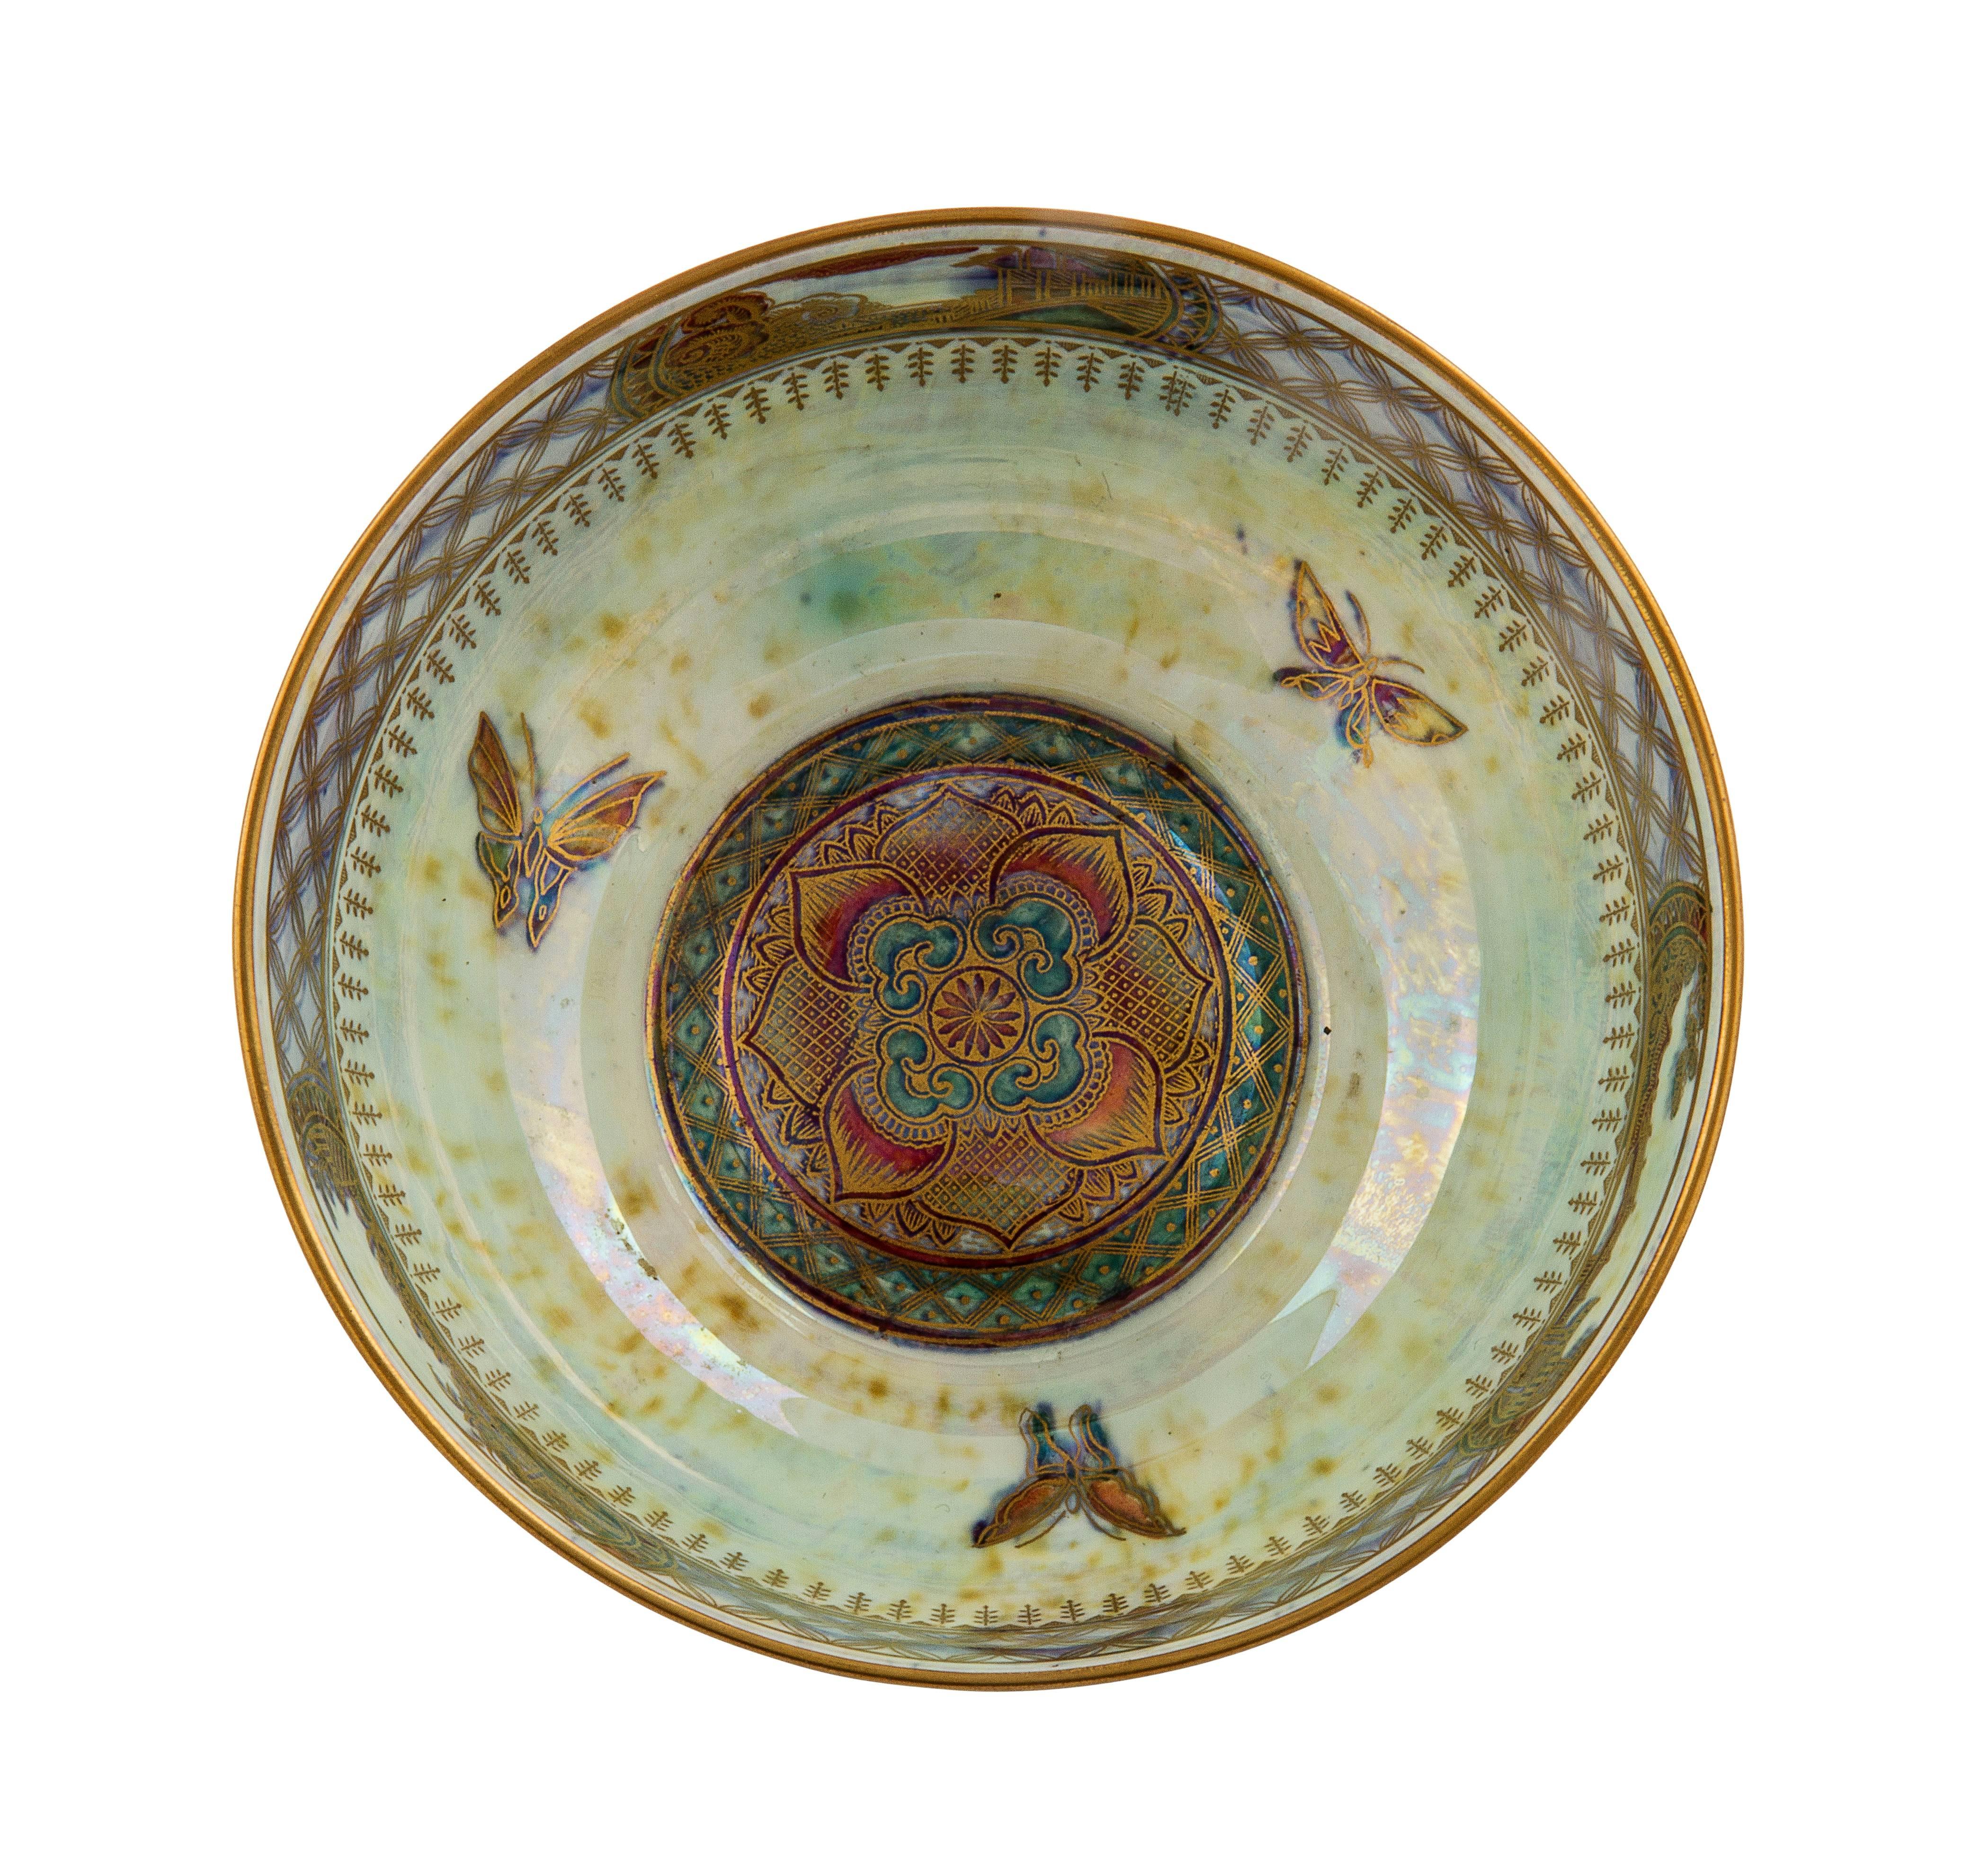 Art Deco wedgwood porcelain fairyland lustre butterfly bowl, designed by Daisy Makeig-Jones, the interior with mottled opalescent green-blue ground, with finely-painted gilt butterflies to well, the exterior painted with a mottled rubyred-gold